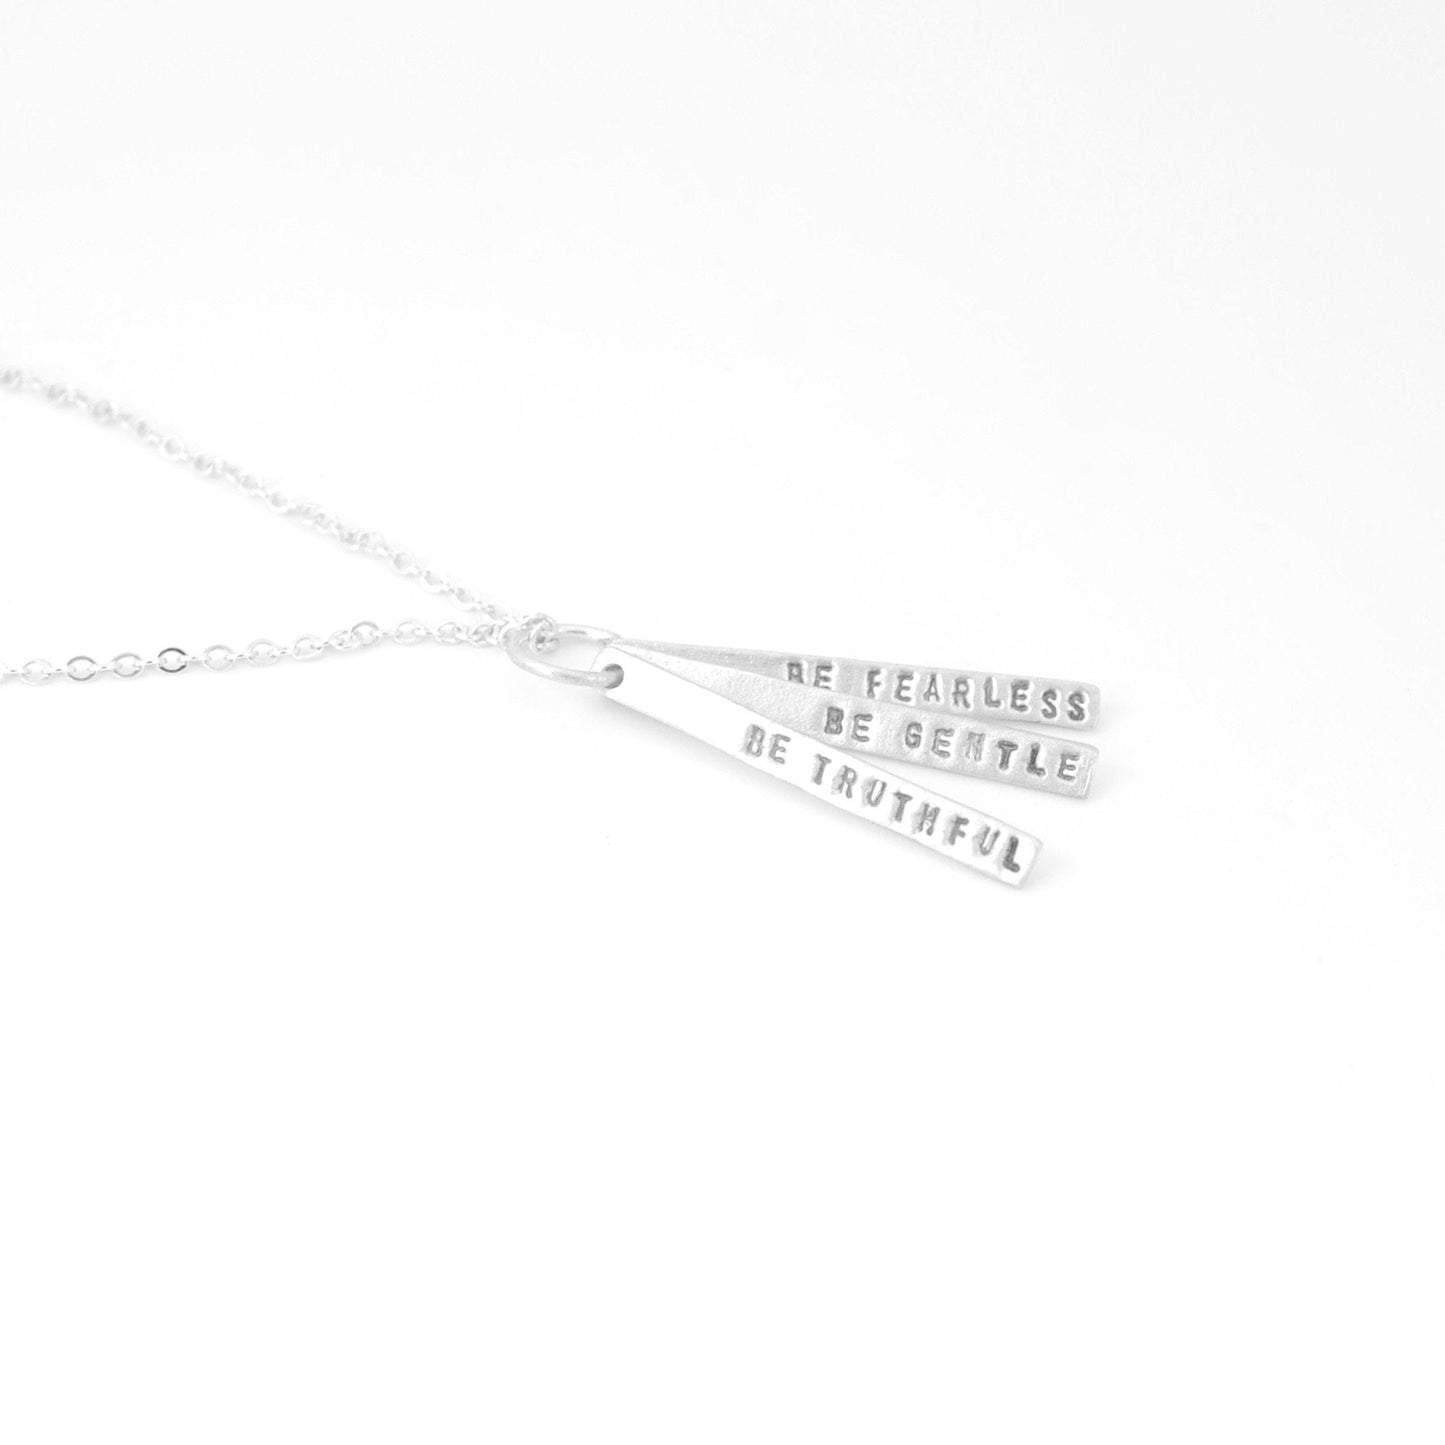 "Be Truthful, Be Gentle, Be Fearless" -Gandhi Quote Necklace